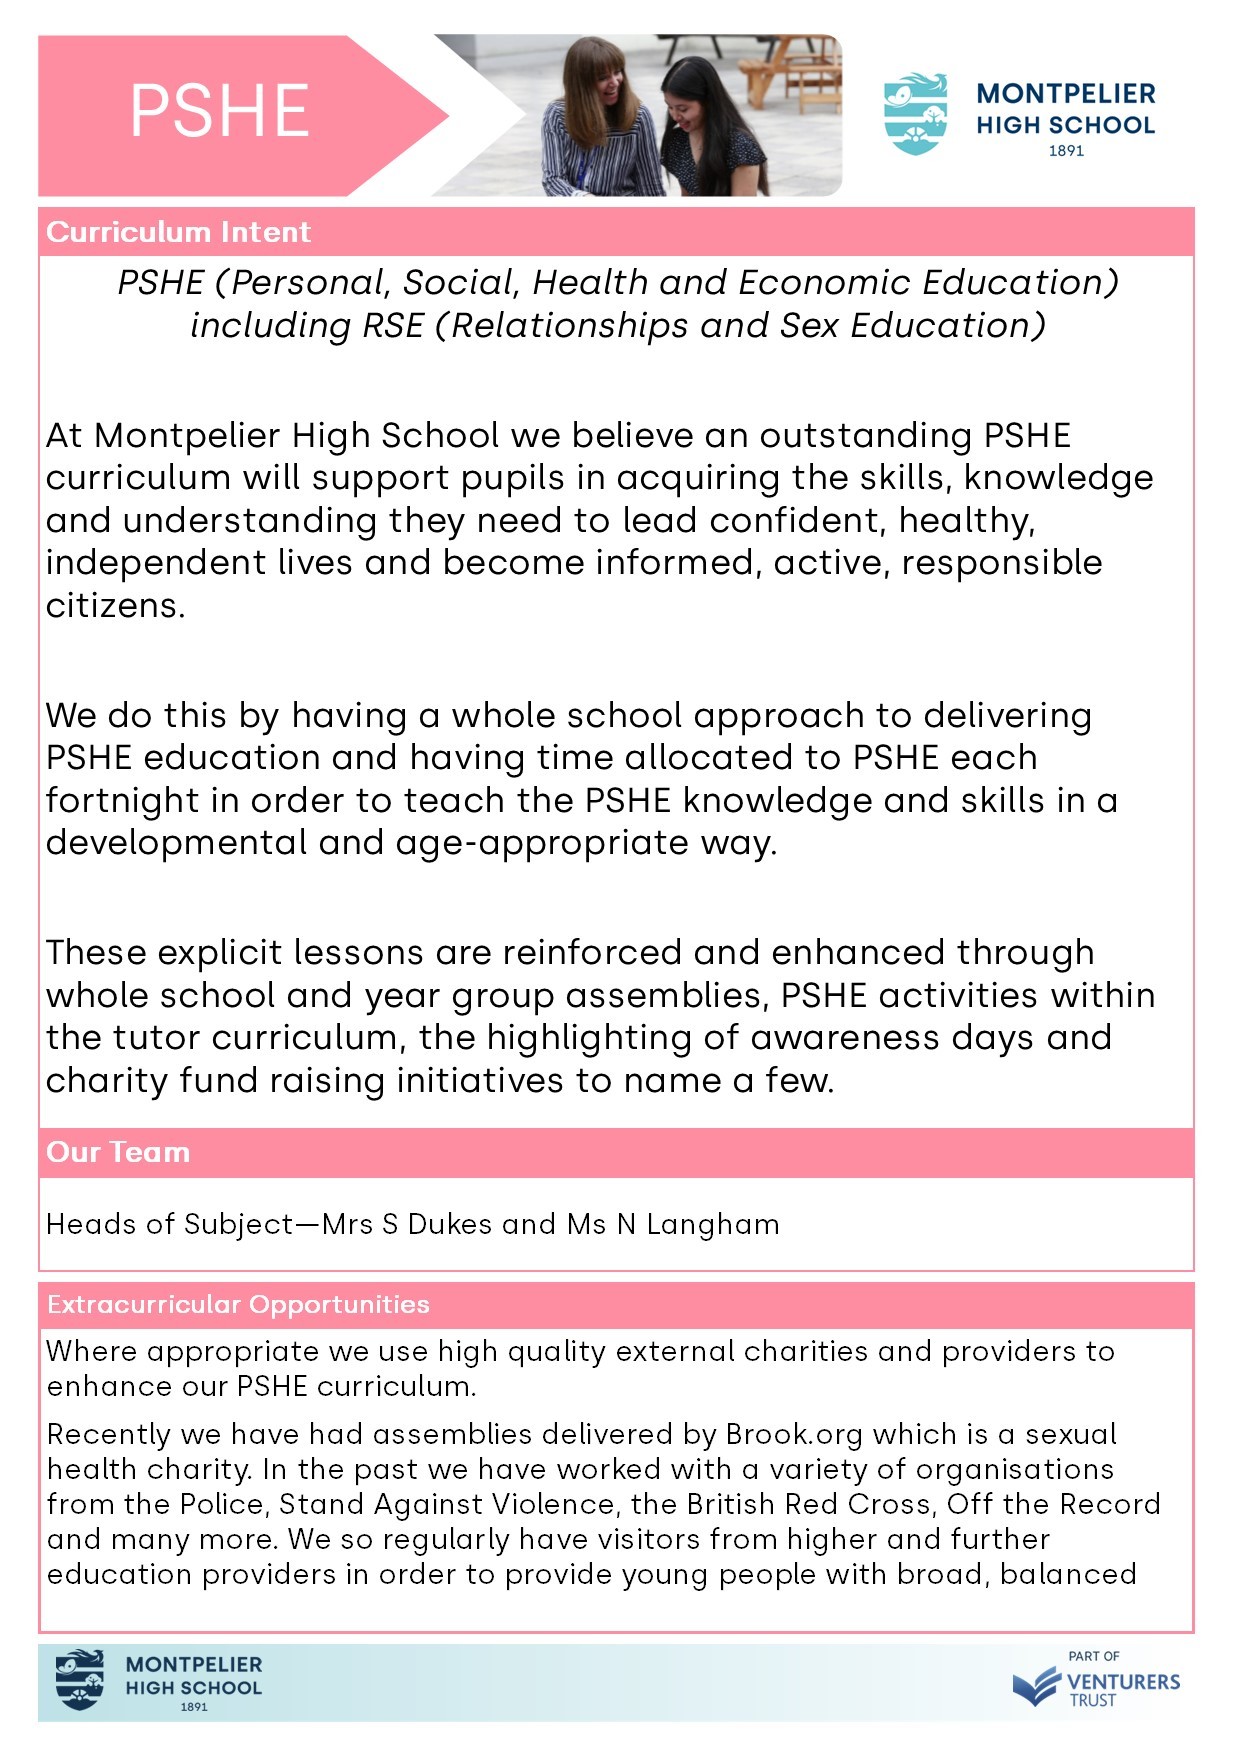 Pshe subject info sept21 page 1 of 2